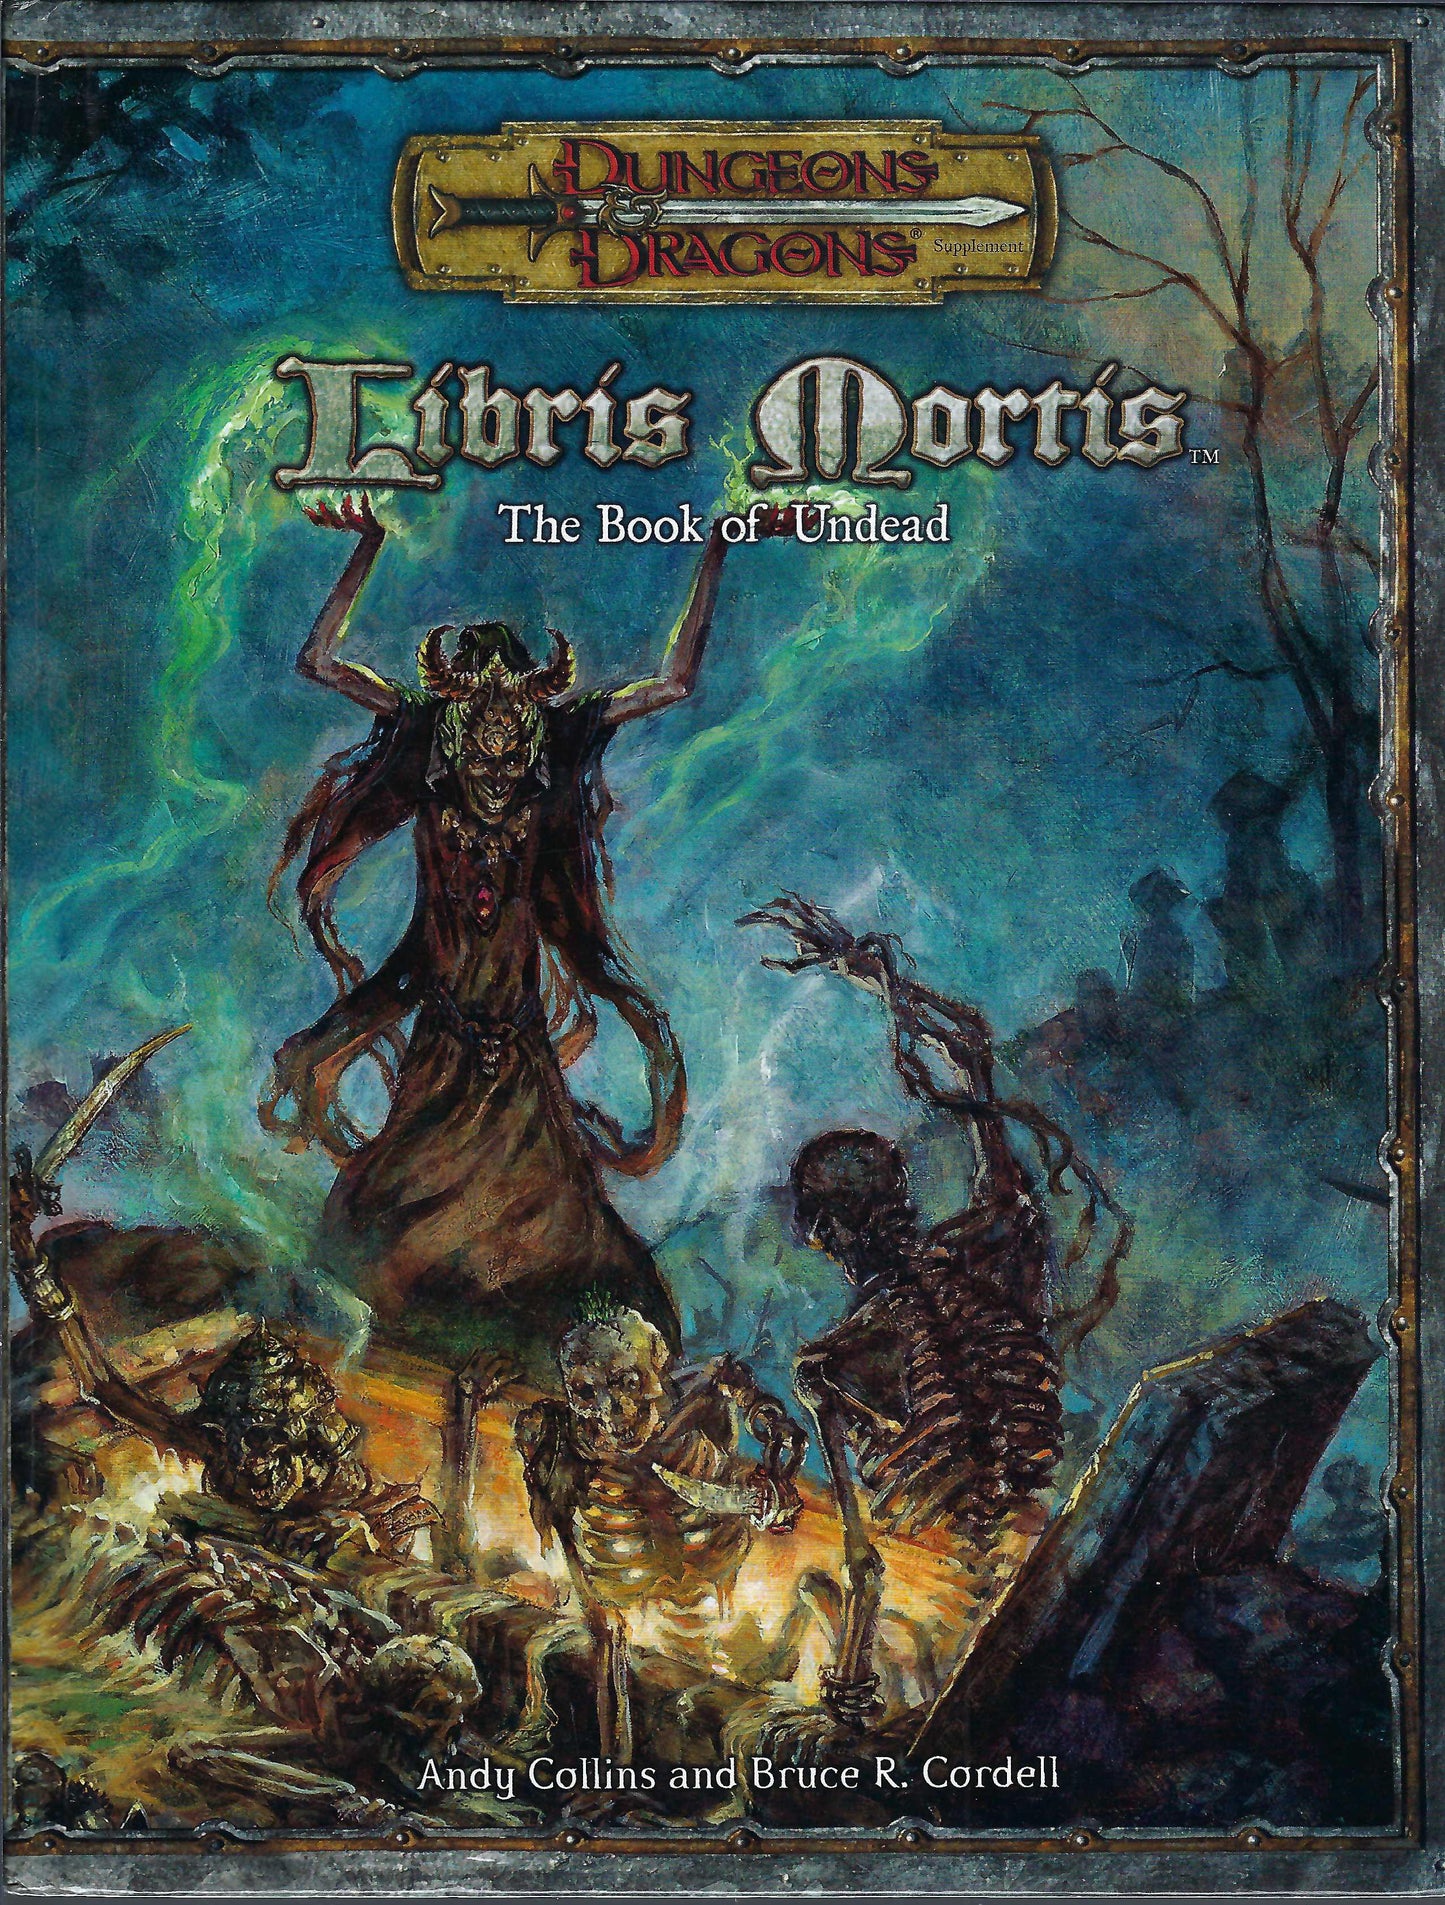 Libris Mortis The Book of the Undead front cover